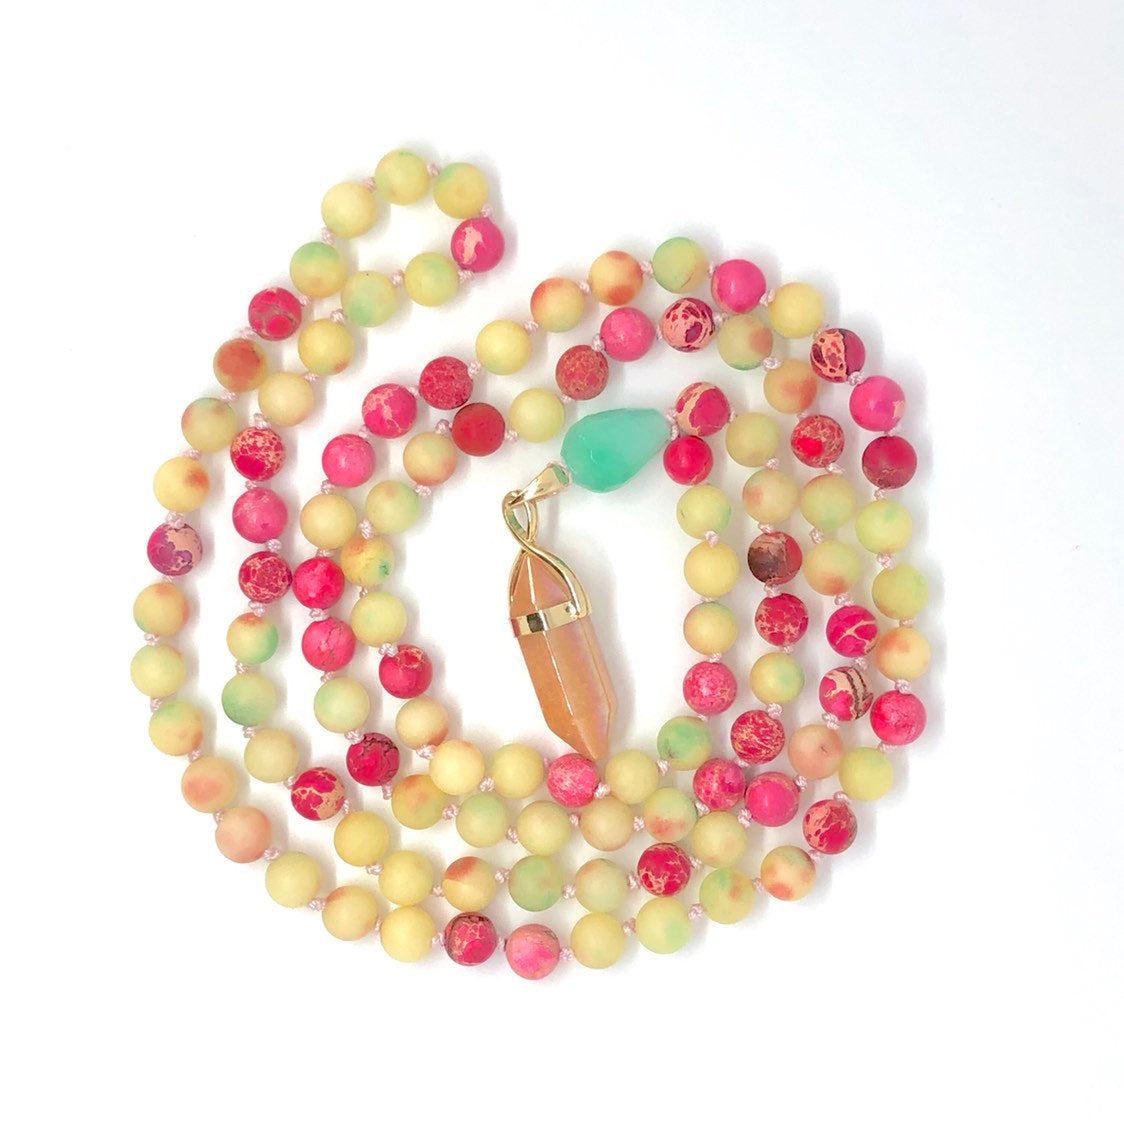 Imperial Jasper + Quartzite 108 Bead Pink and Green Mala Necklace